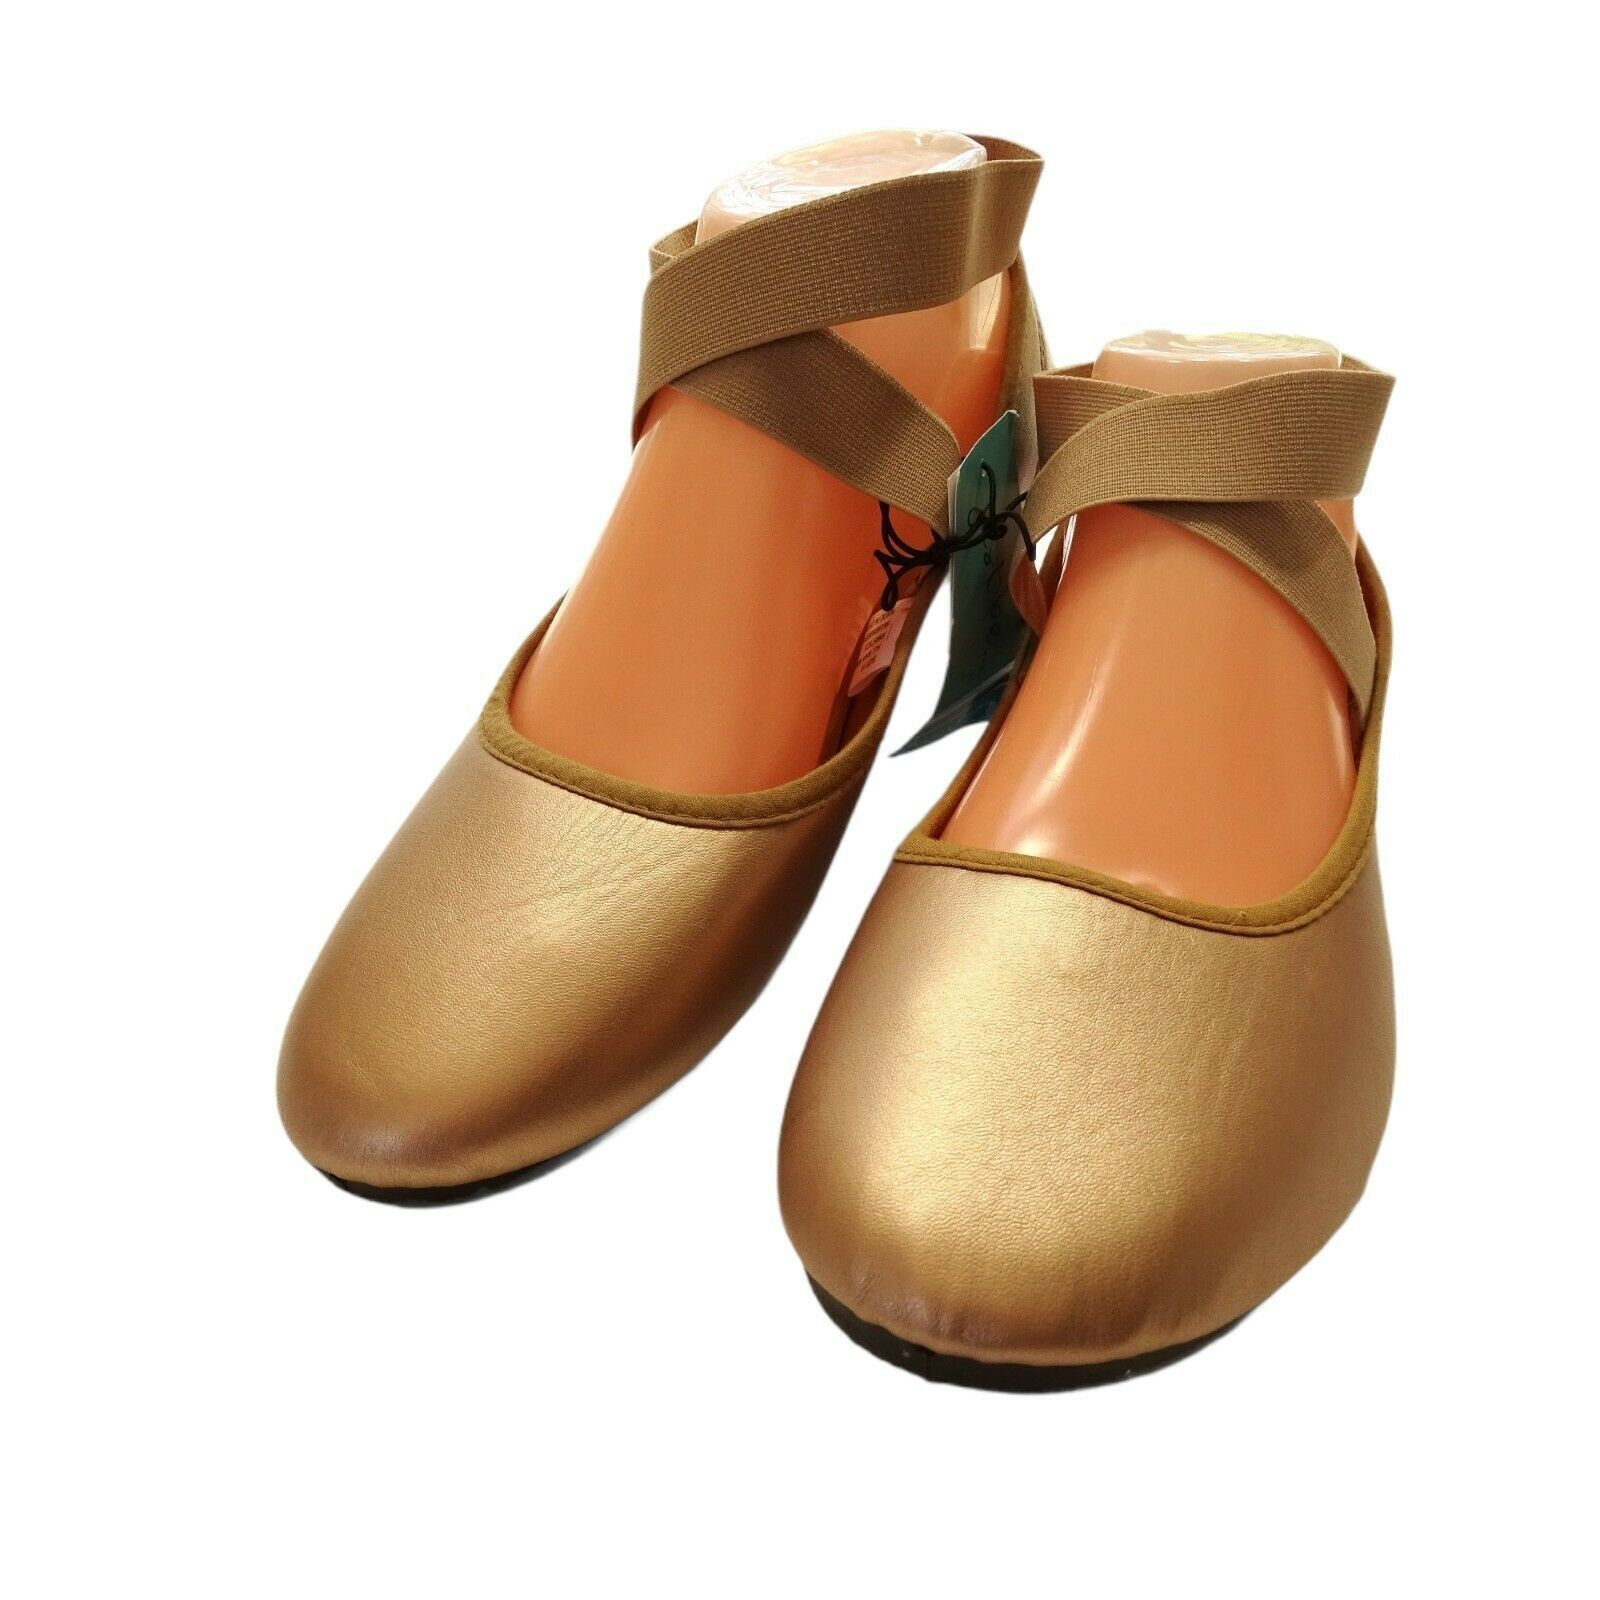 Just Be Ballerina Flats Women's Size and 50 similar items